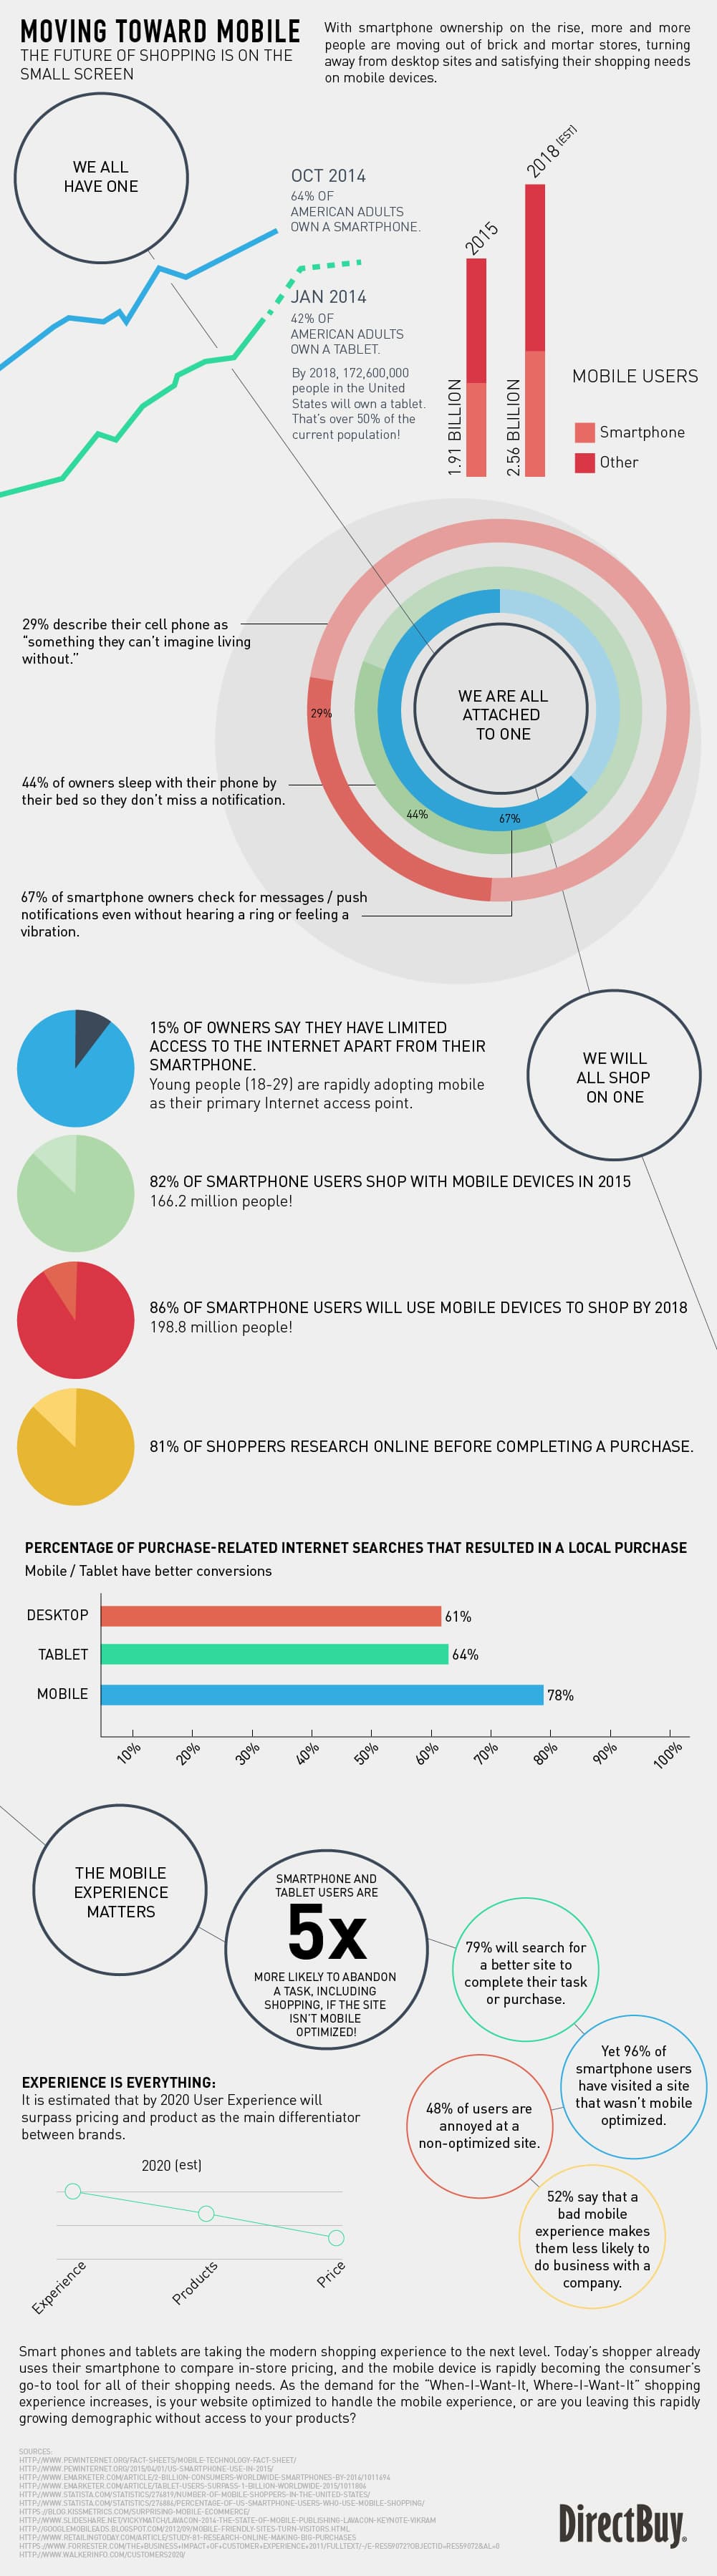 Moving-Toward-Mobile-Infographic